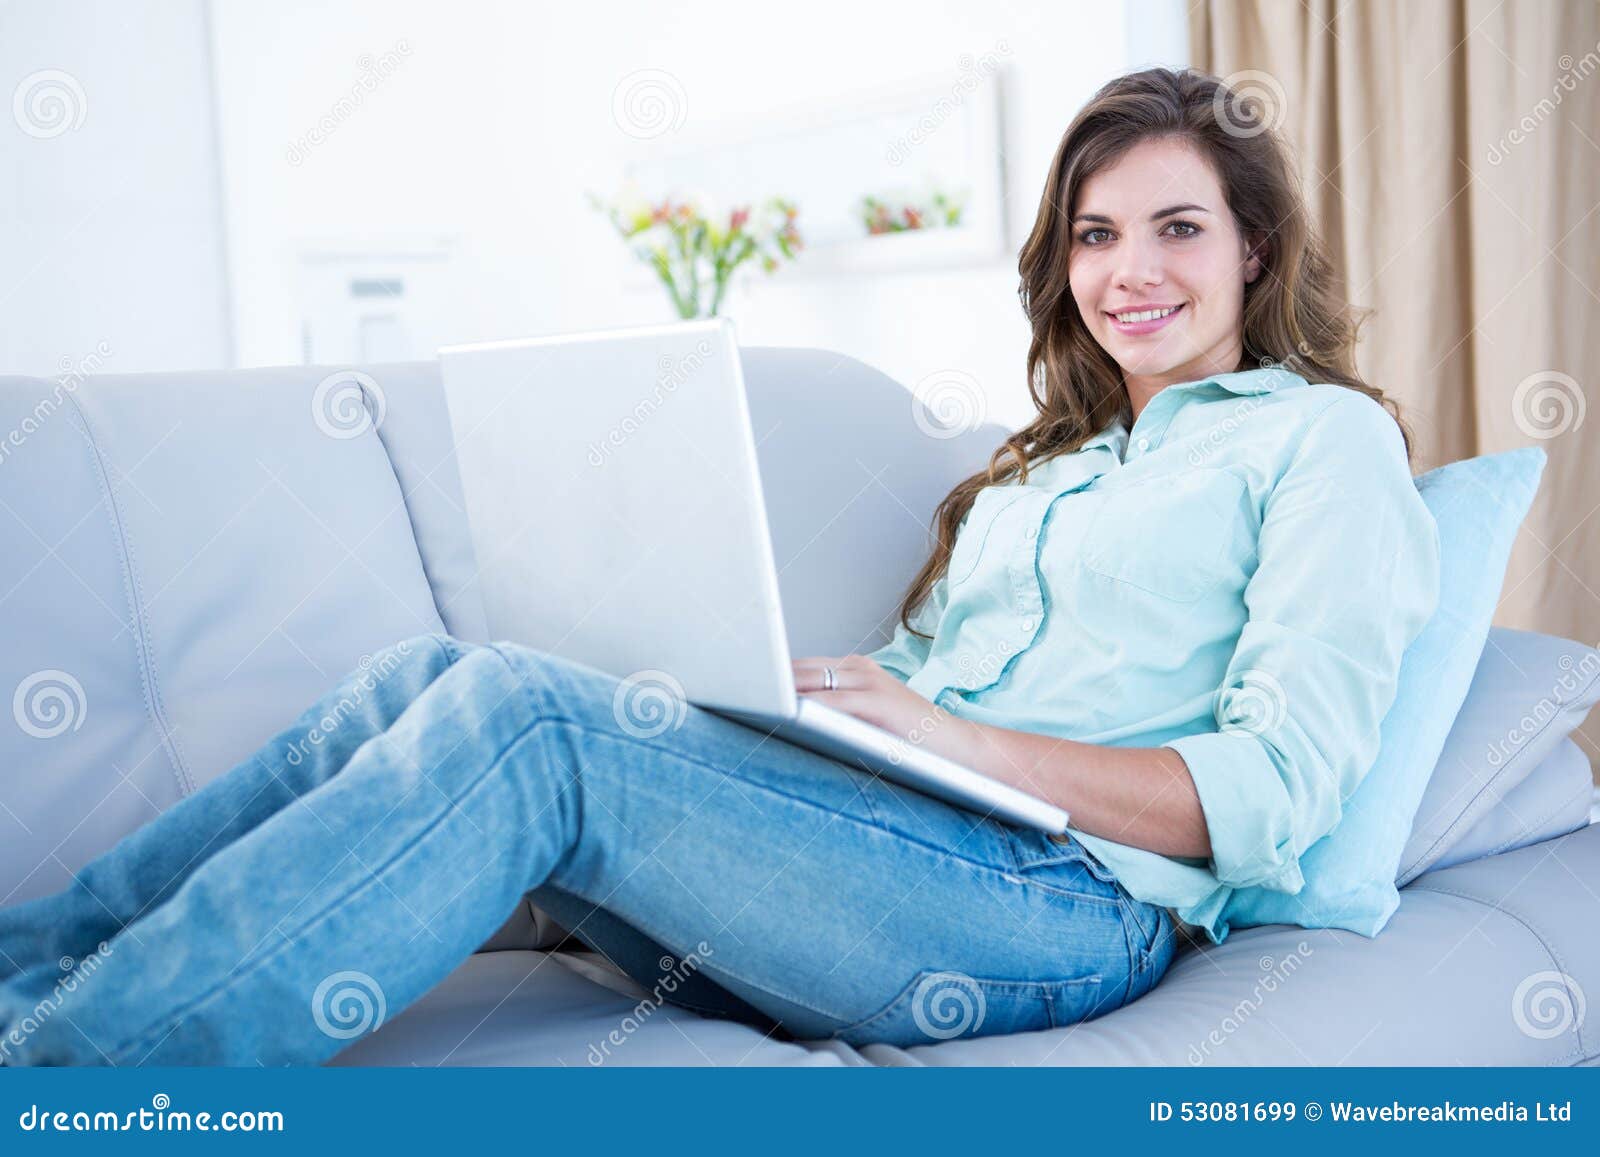 Happy Brunette Using Her Laptop on Couch Stock Image - Image of ...